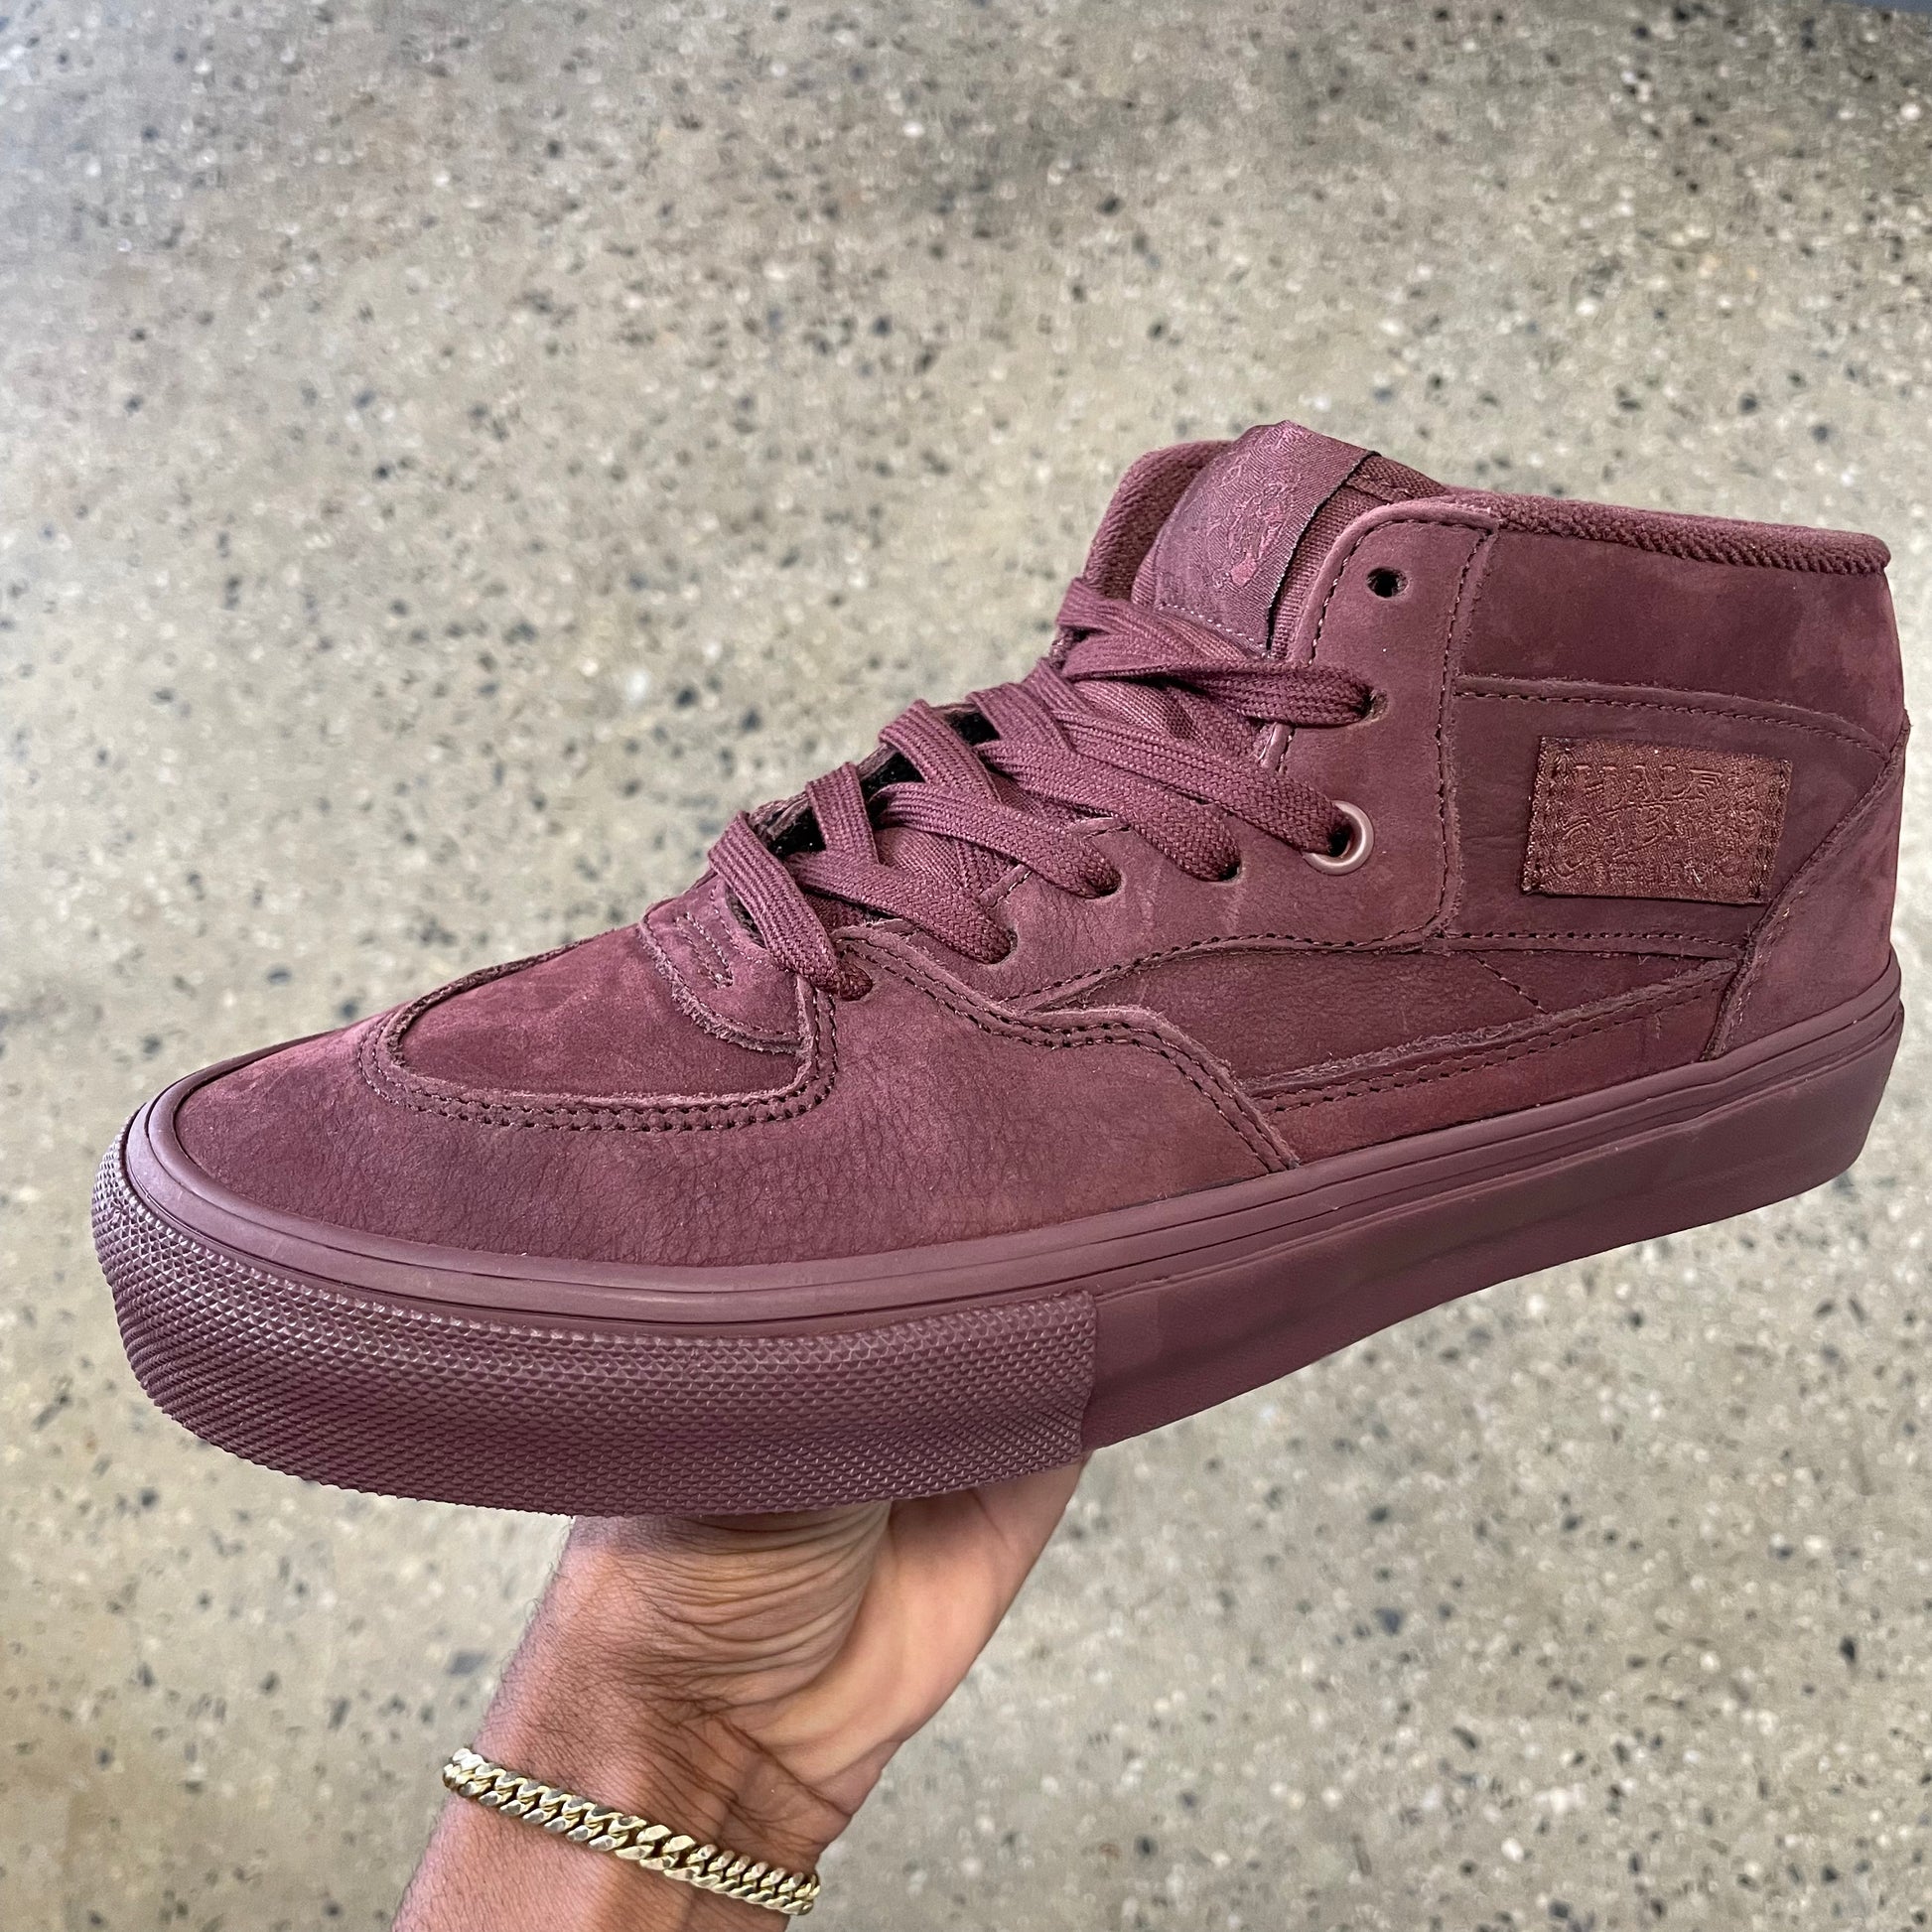 side view of premium suede mid top skateboard shoe in chocolate pig suede, looks closer to brick red in person